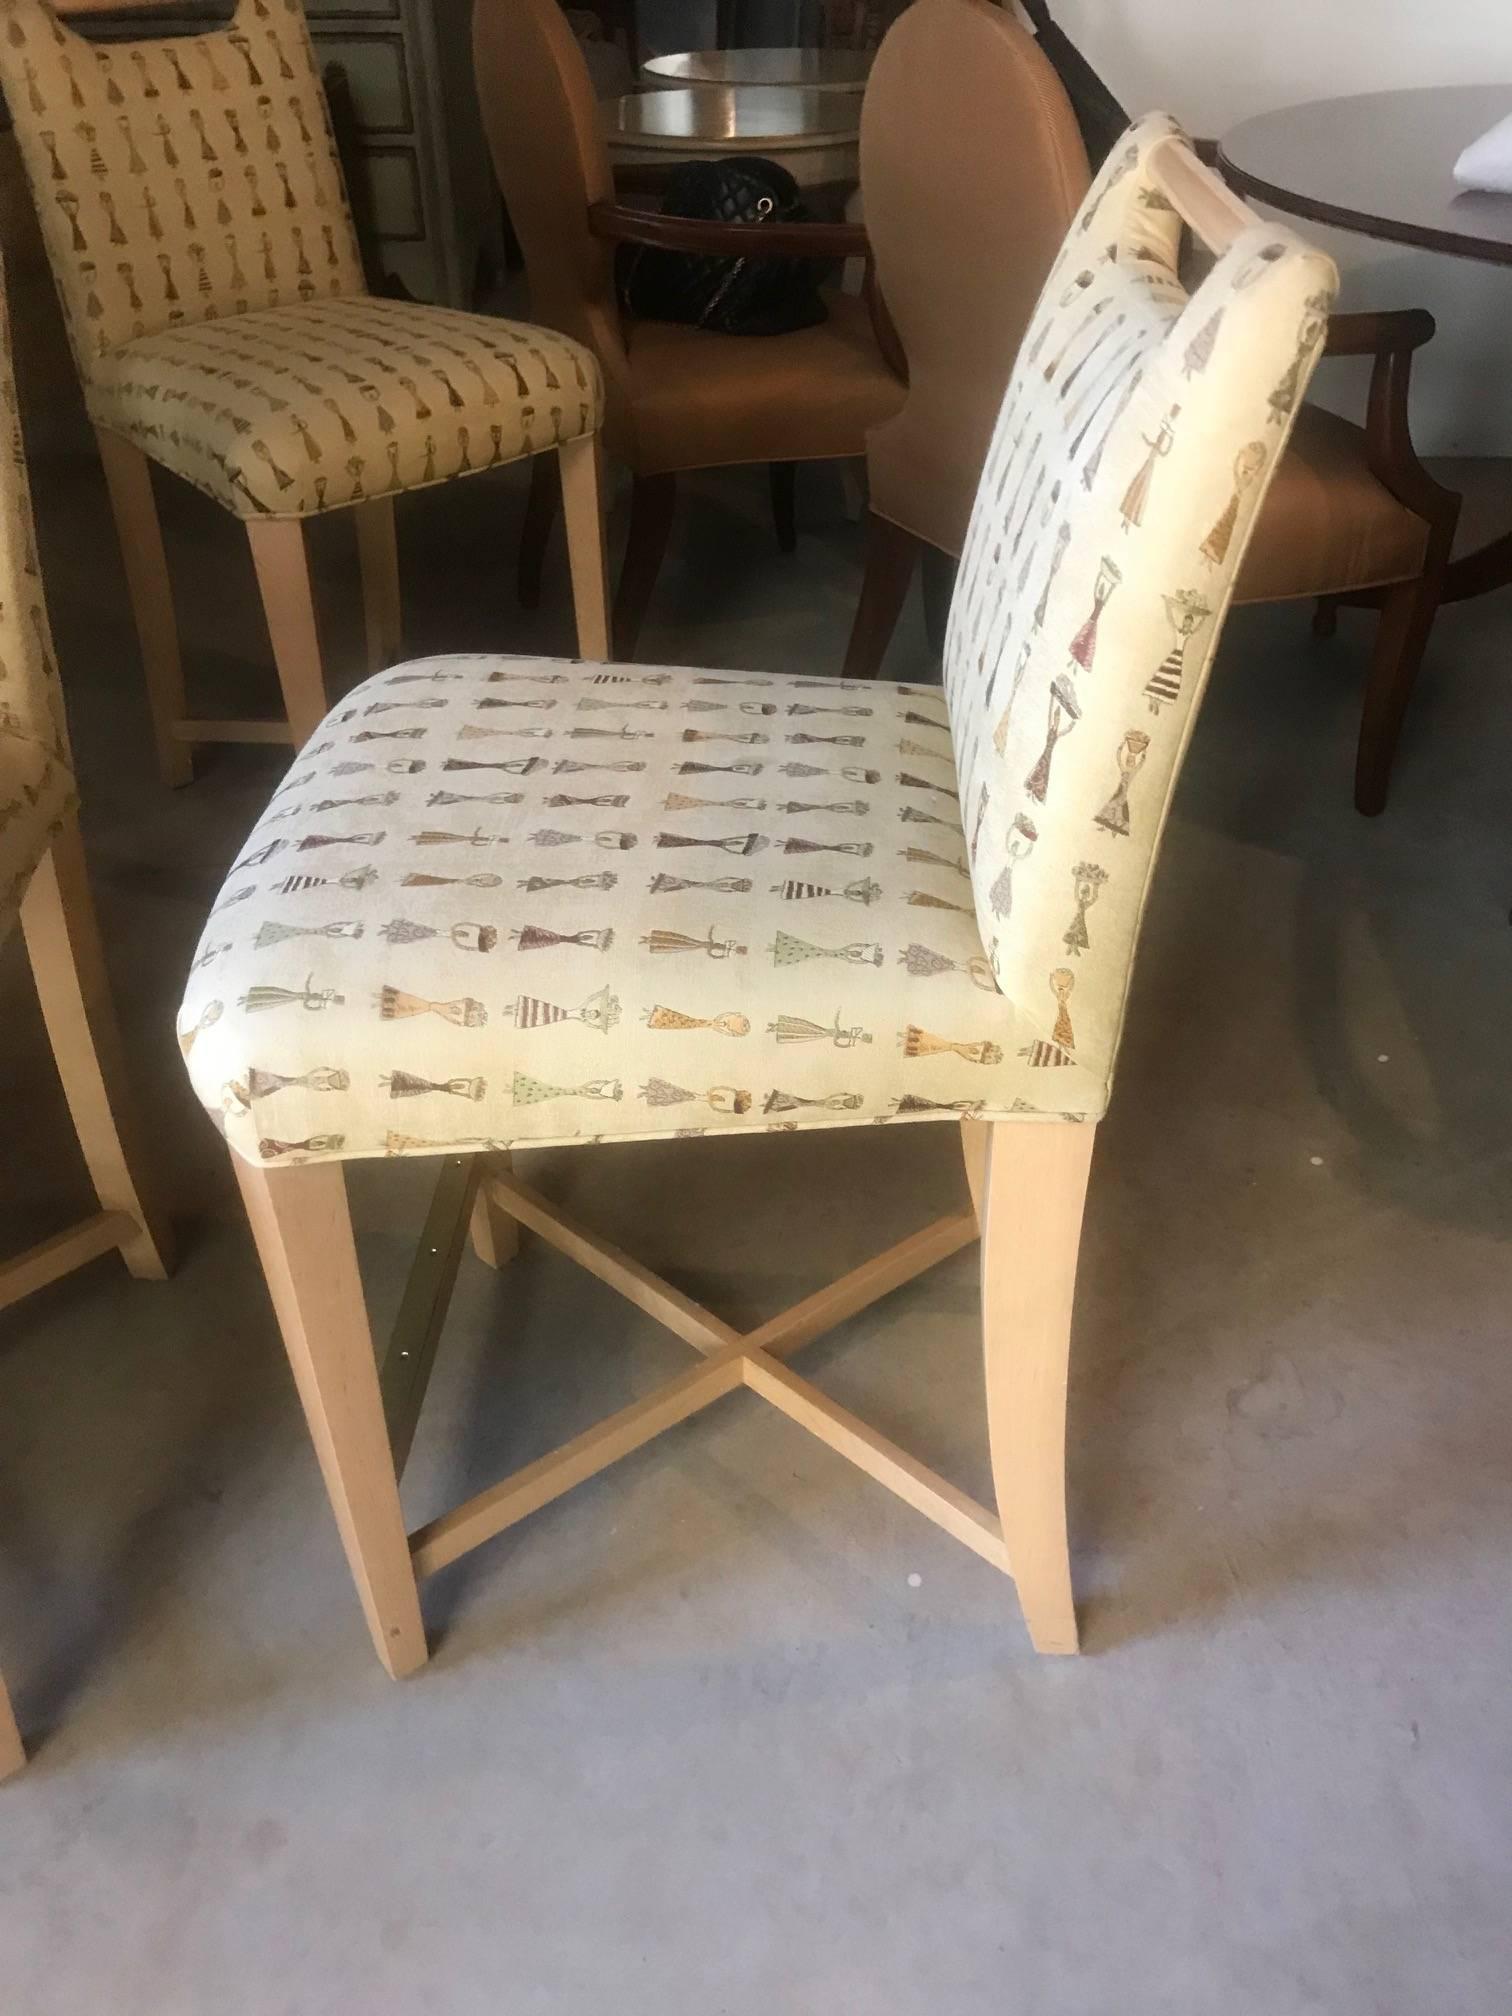 A set of four counter height very stylish chairs having a chic Italian look with light wood angular legs and dowel at the top, upholstered in a fun beige fabric patterned with fashionable ladies in different attire. Rich looking brass plates at the